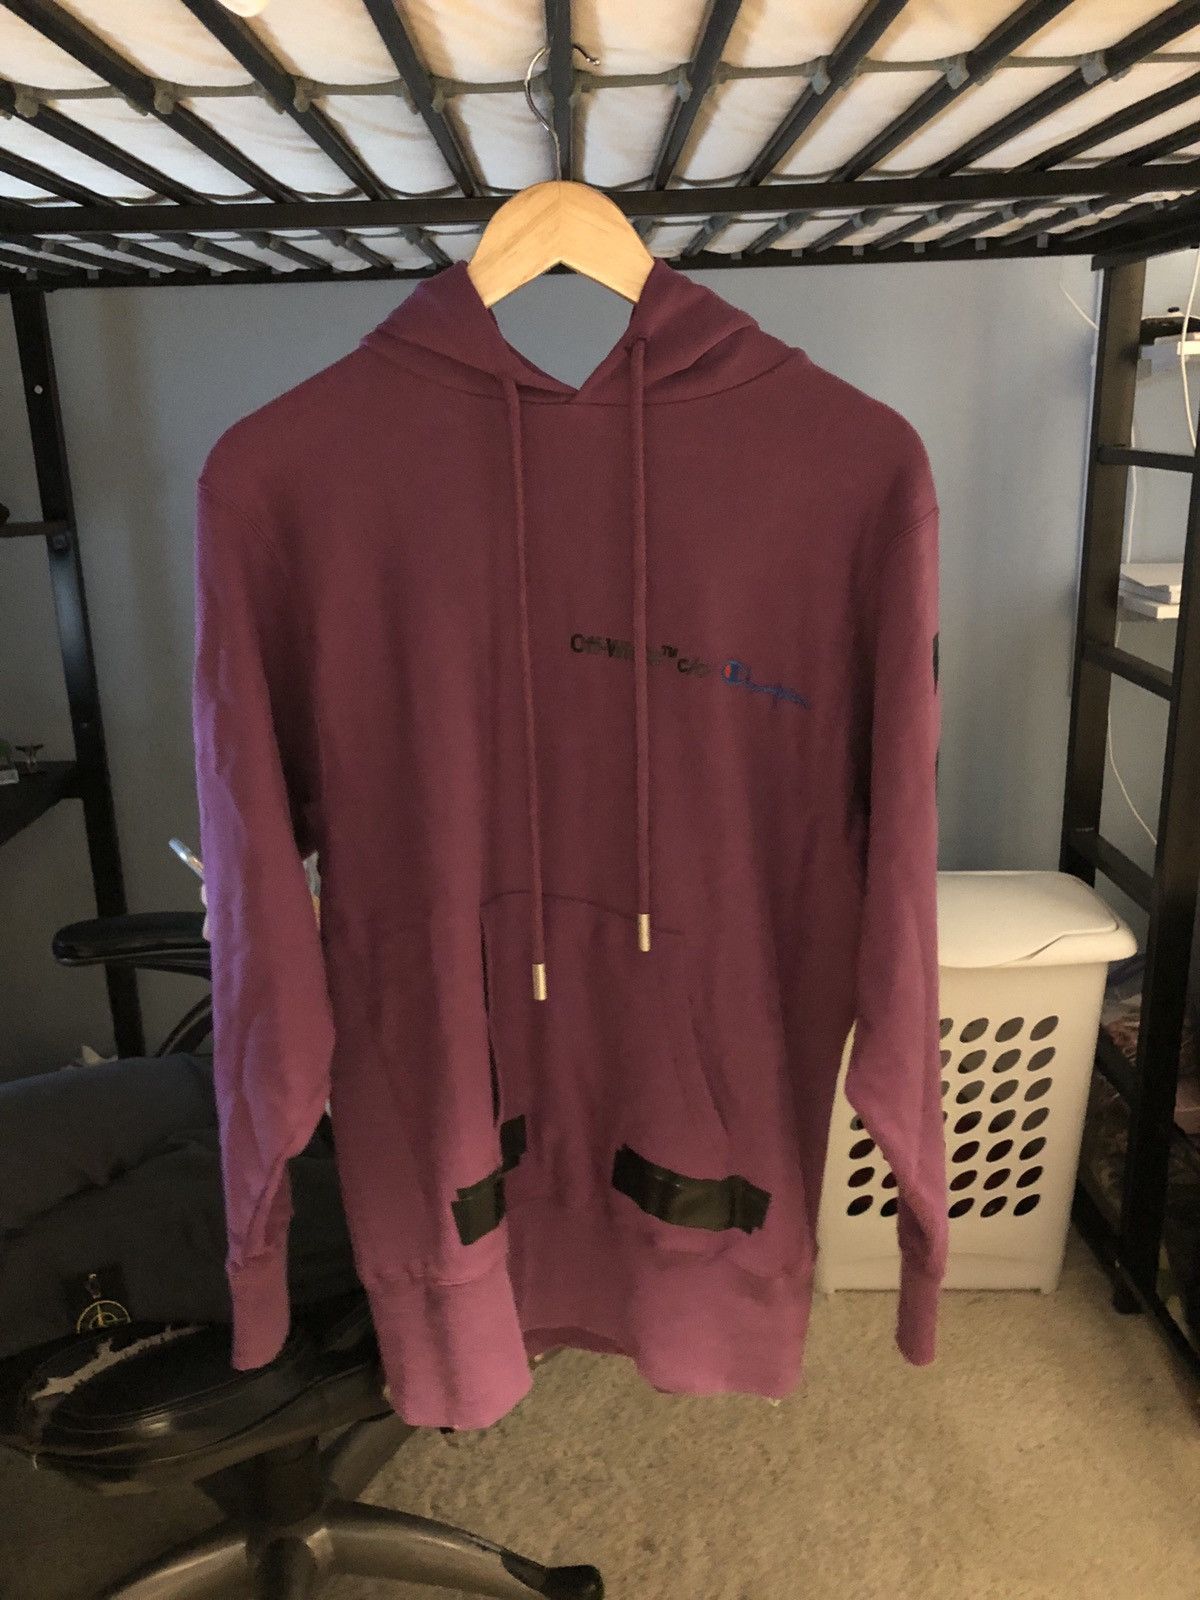 Off-White Offwhite X Champion Purple Hoodie Size US S / EU 44-46 / 1 - 1 Preview